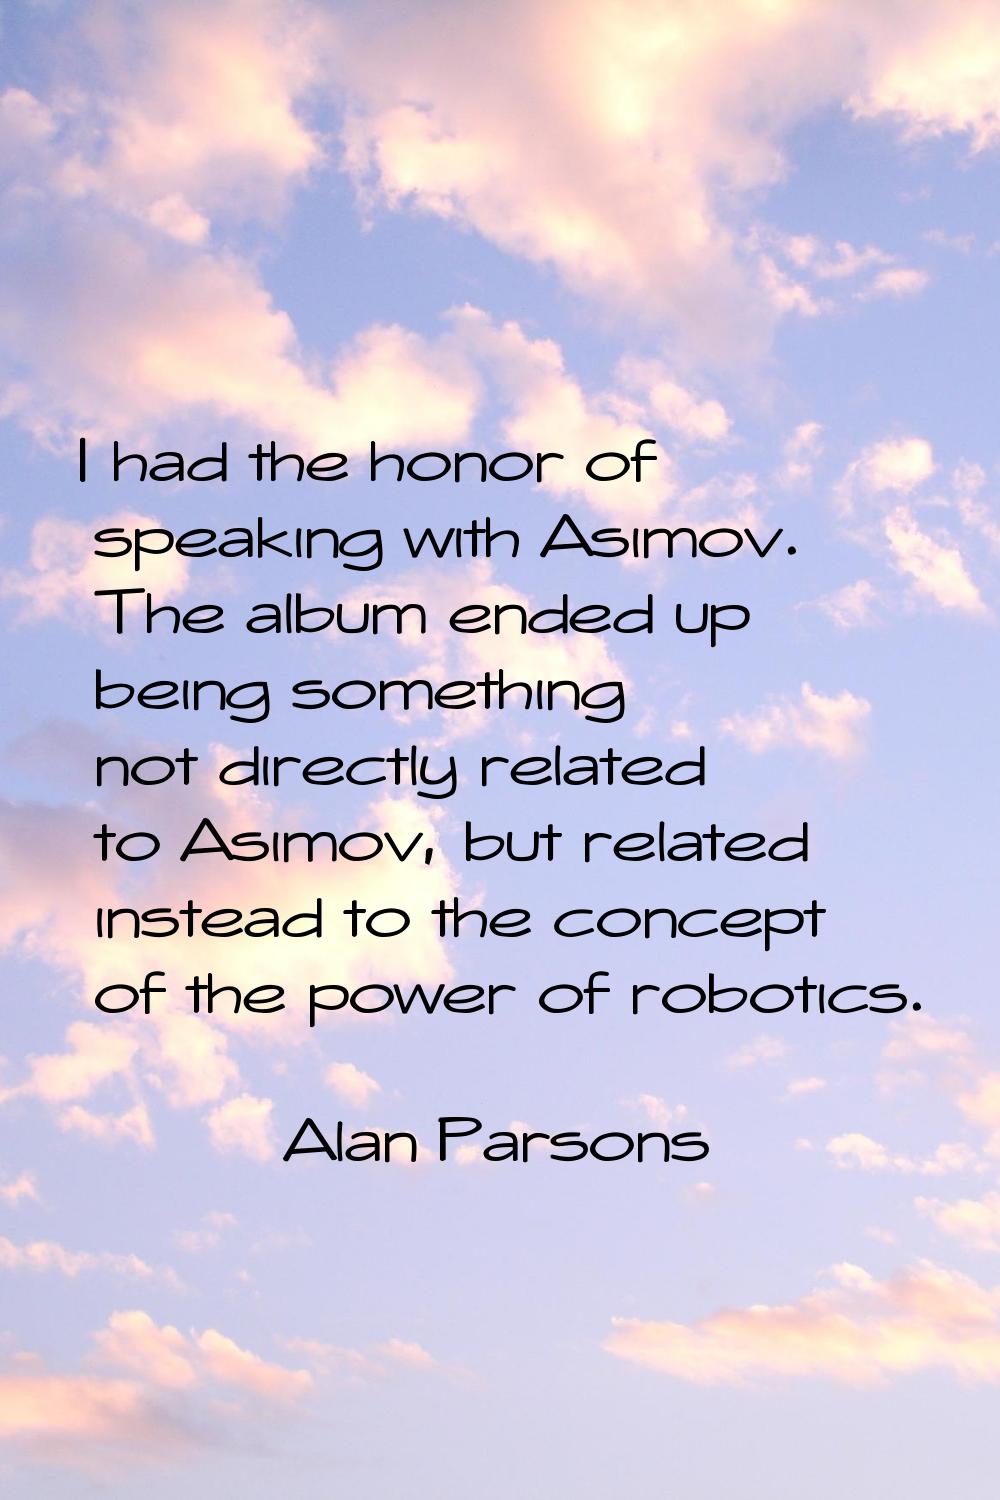 I had the honor of speaking with Asimov. The album ended up being something not directly related to